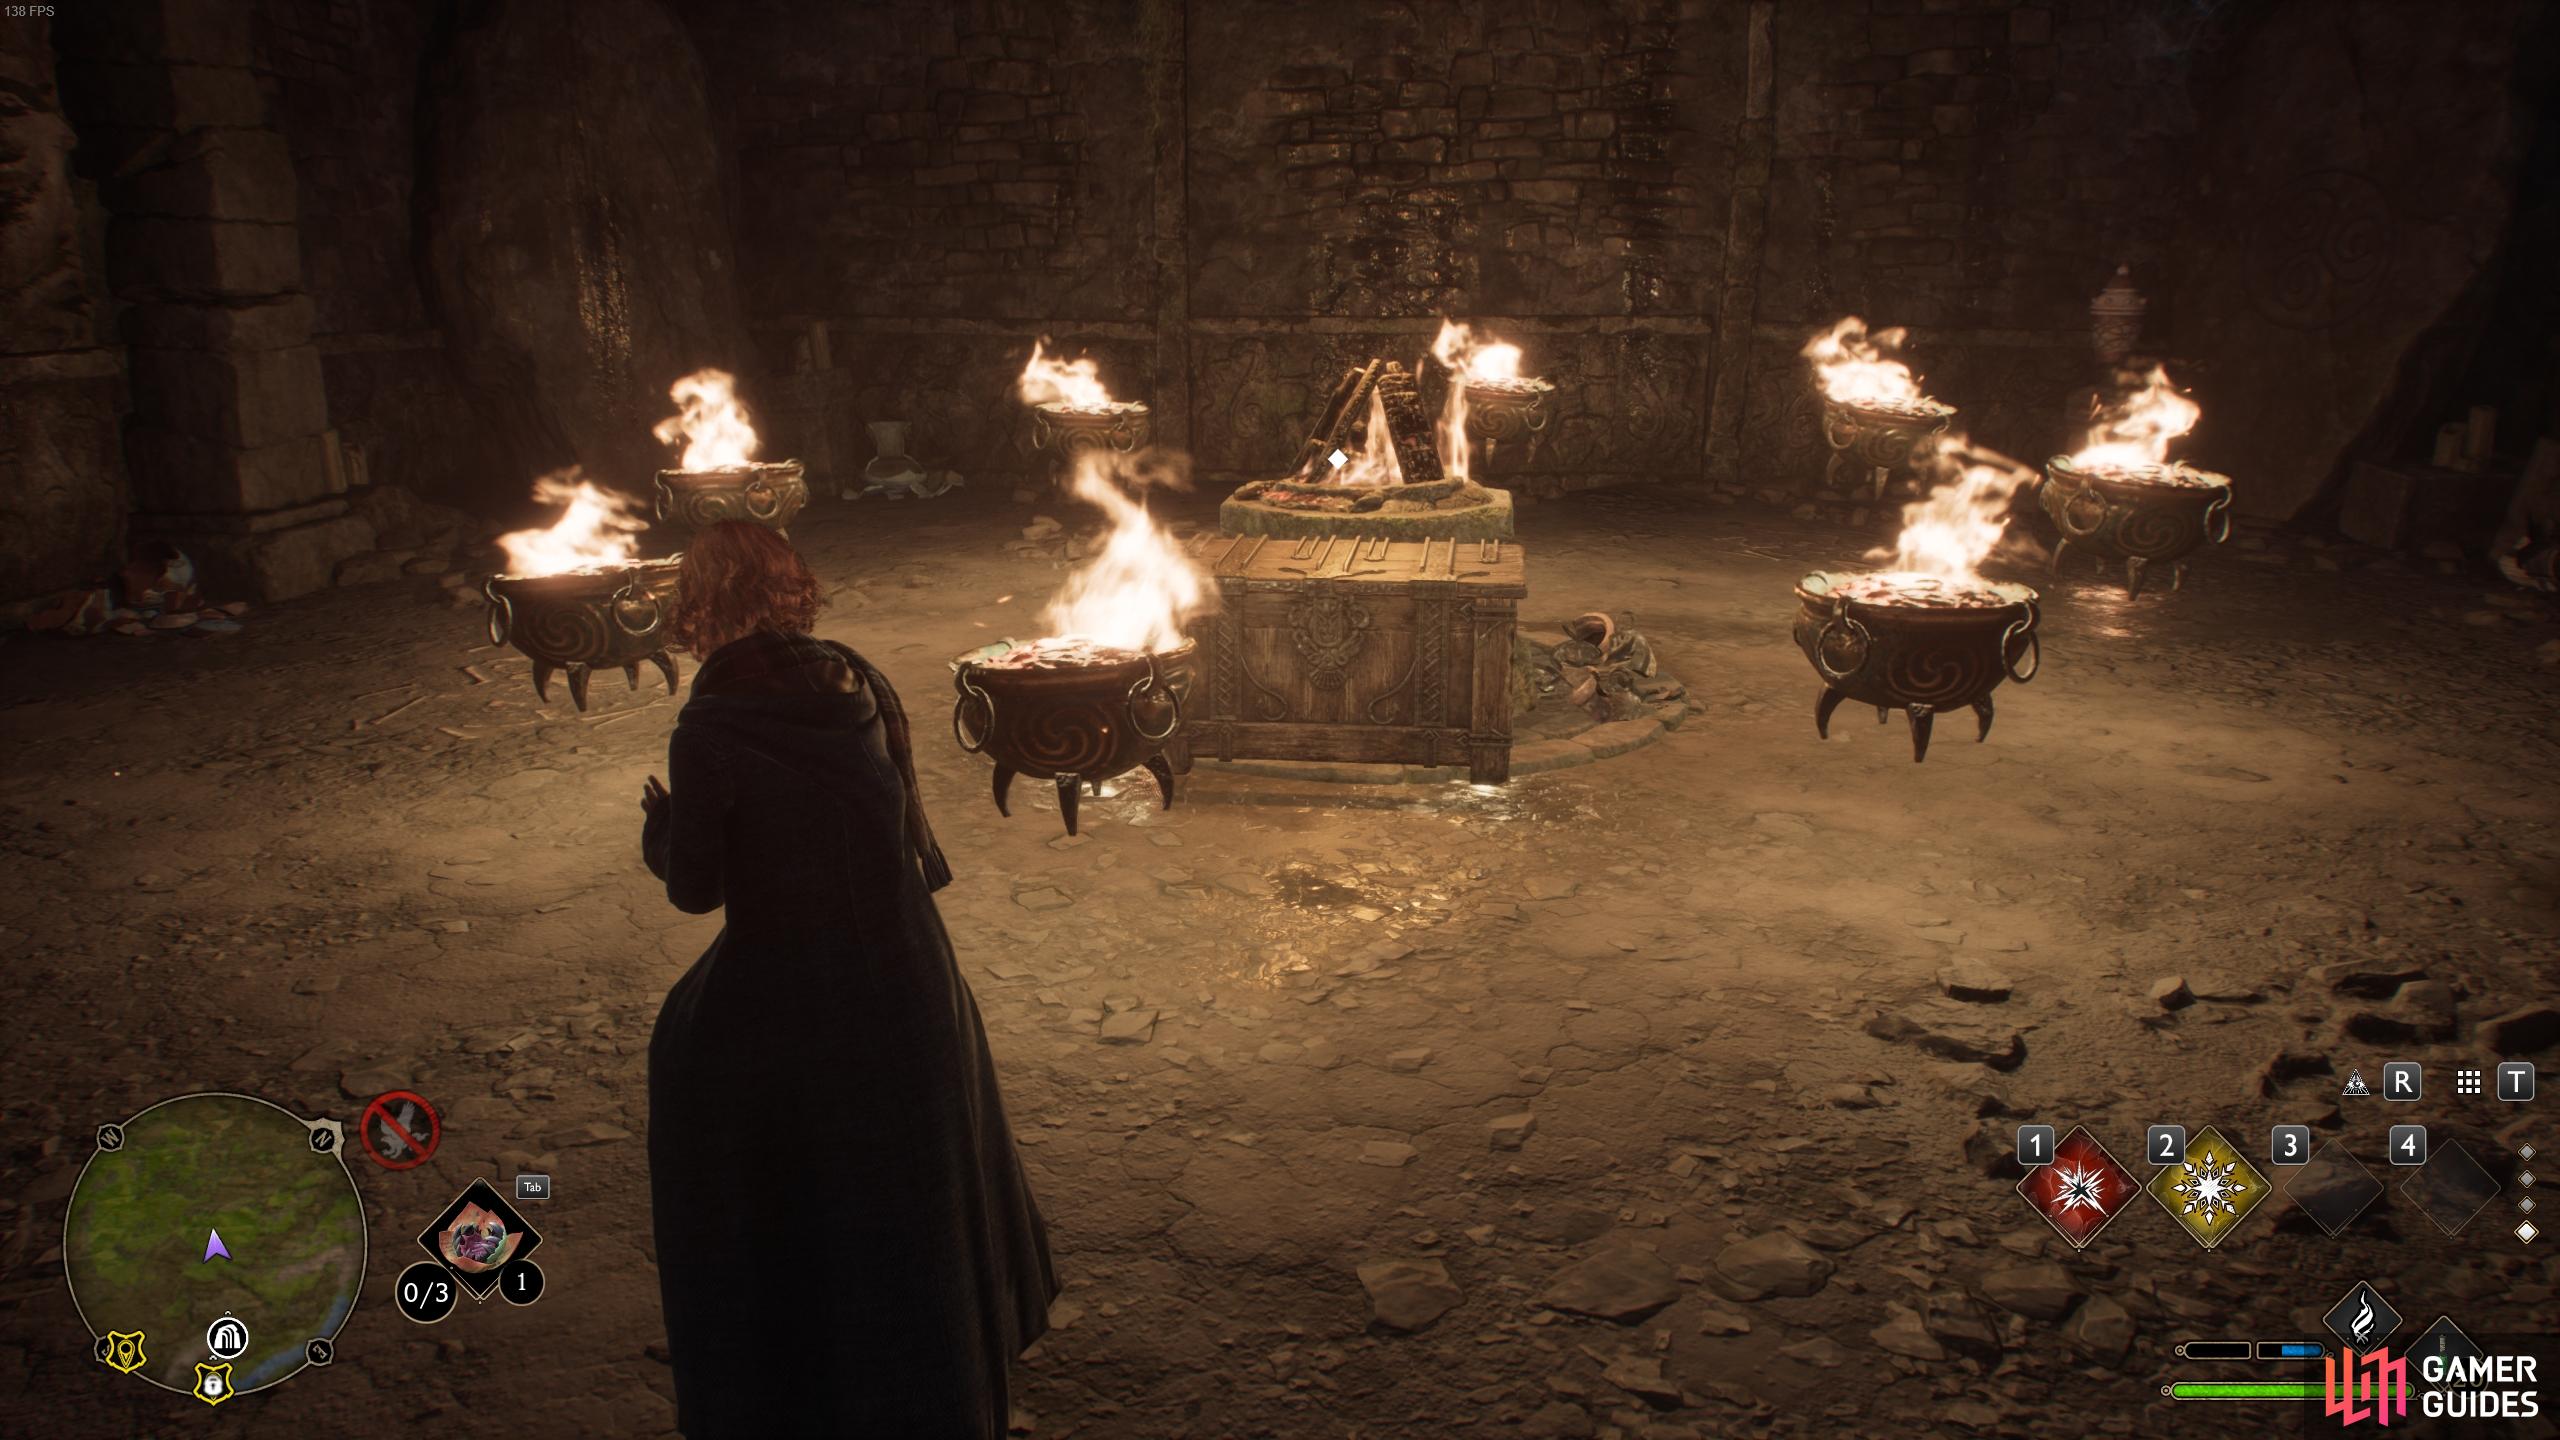 Use a fire-based spell to light the braziers and reveal the chest.